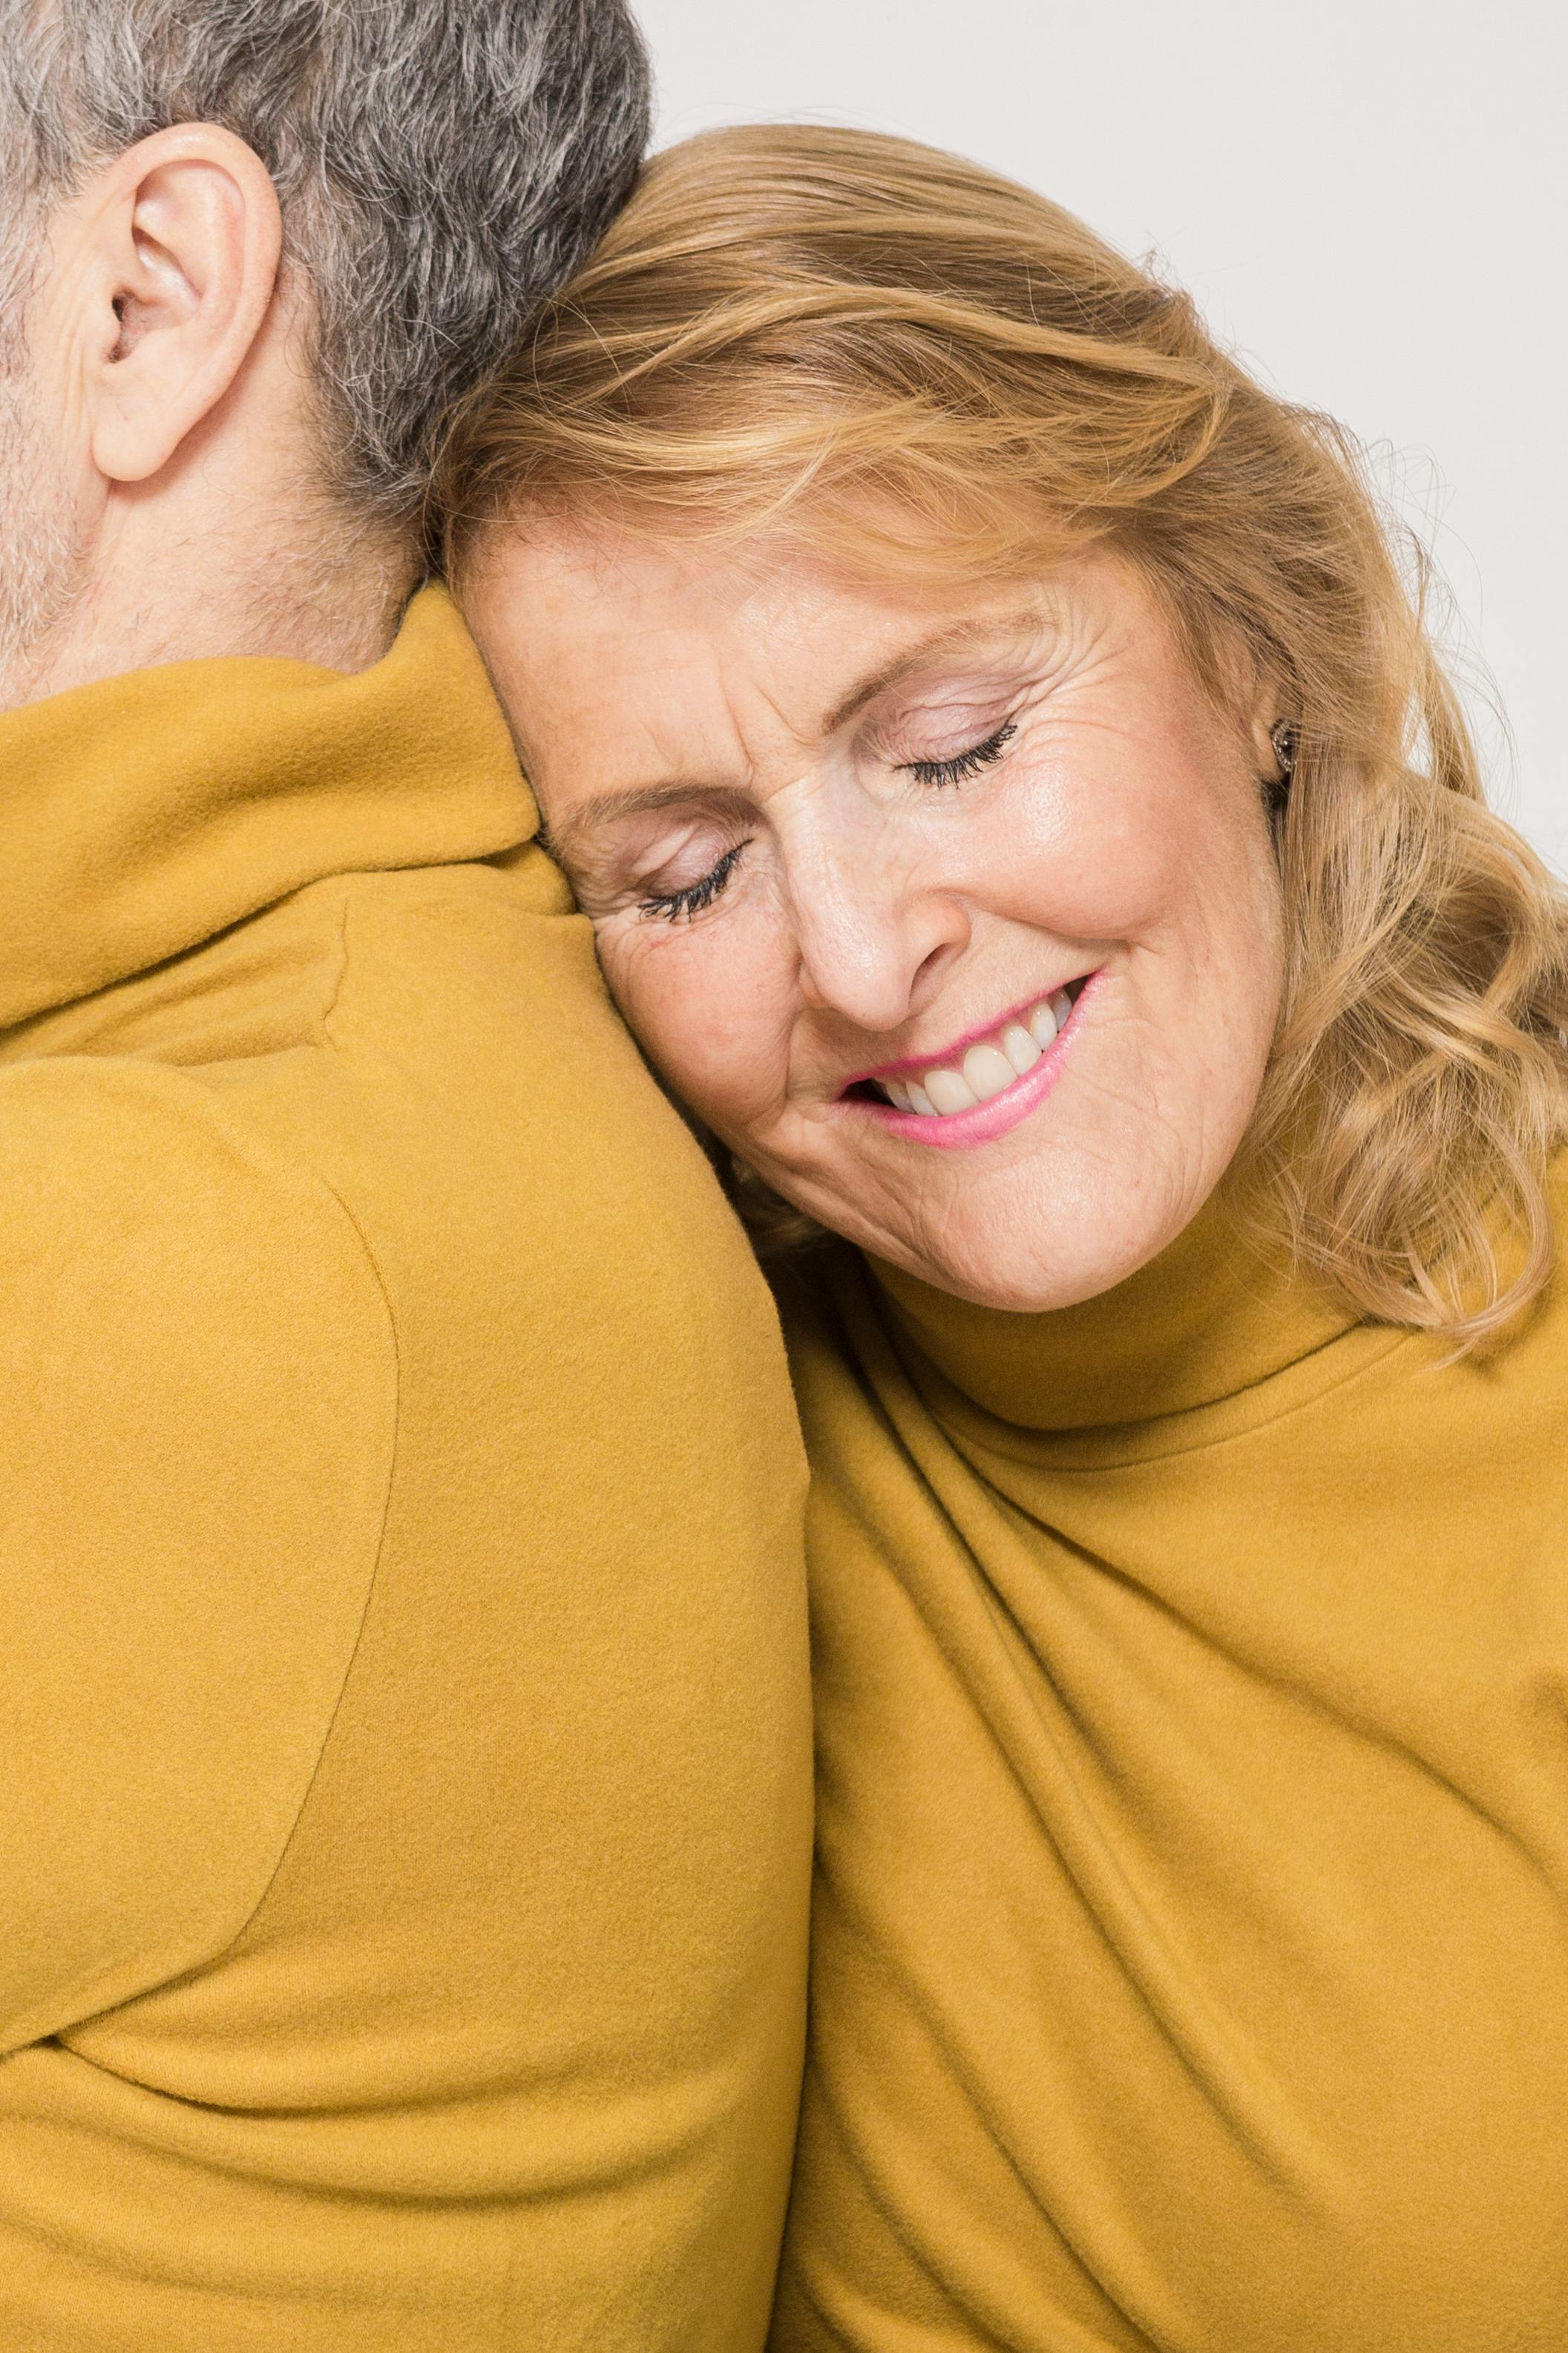 A woman smiling while leaning on her husband | Source: Pexels